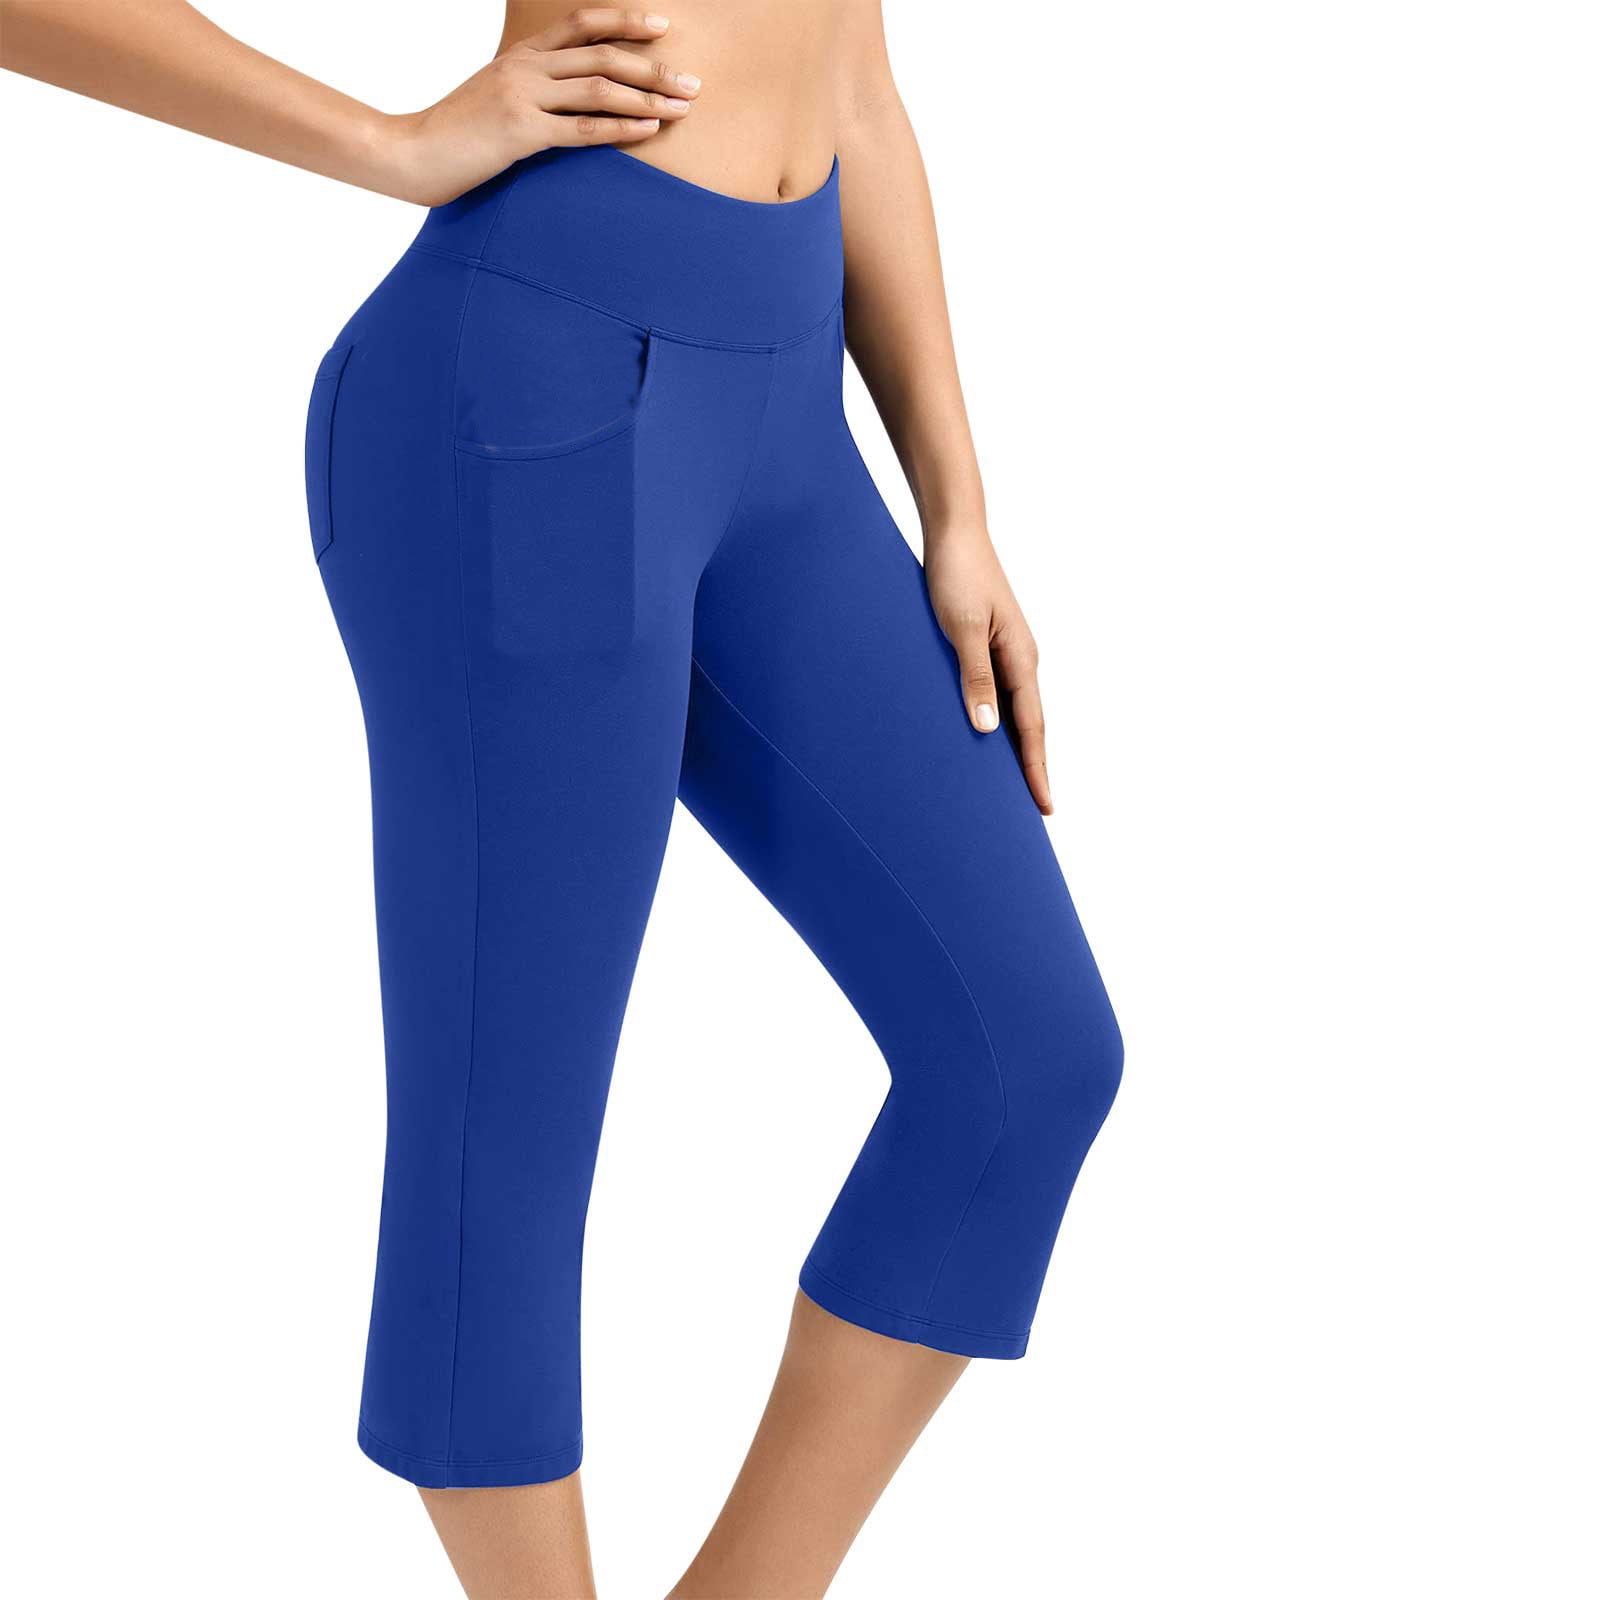 YYDGH High Waisted Yoga Pants for Women with Pockets Capri Leggings for ...